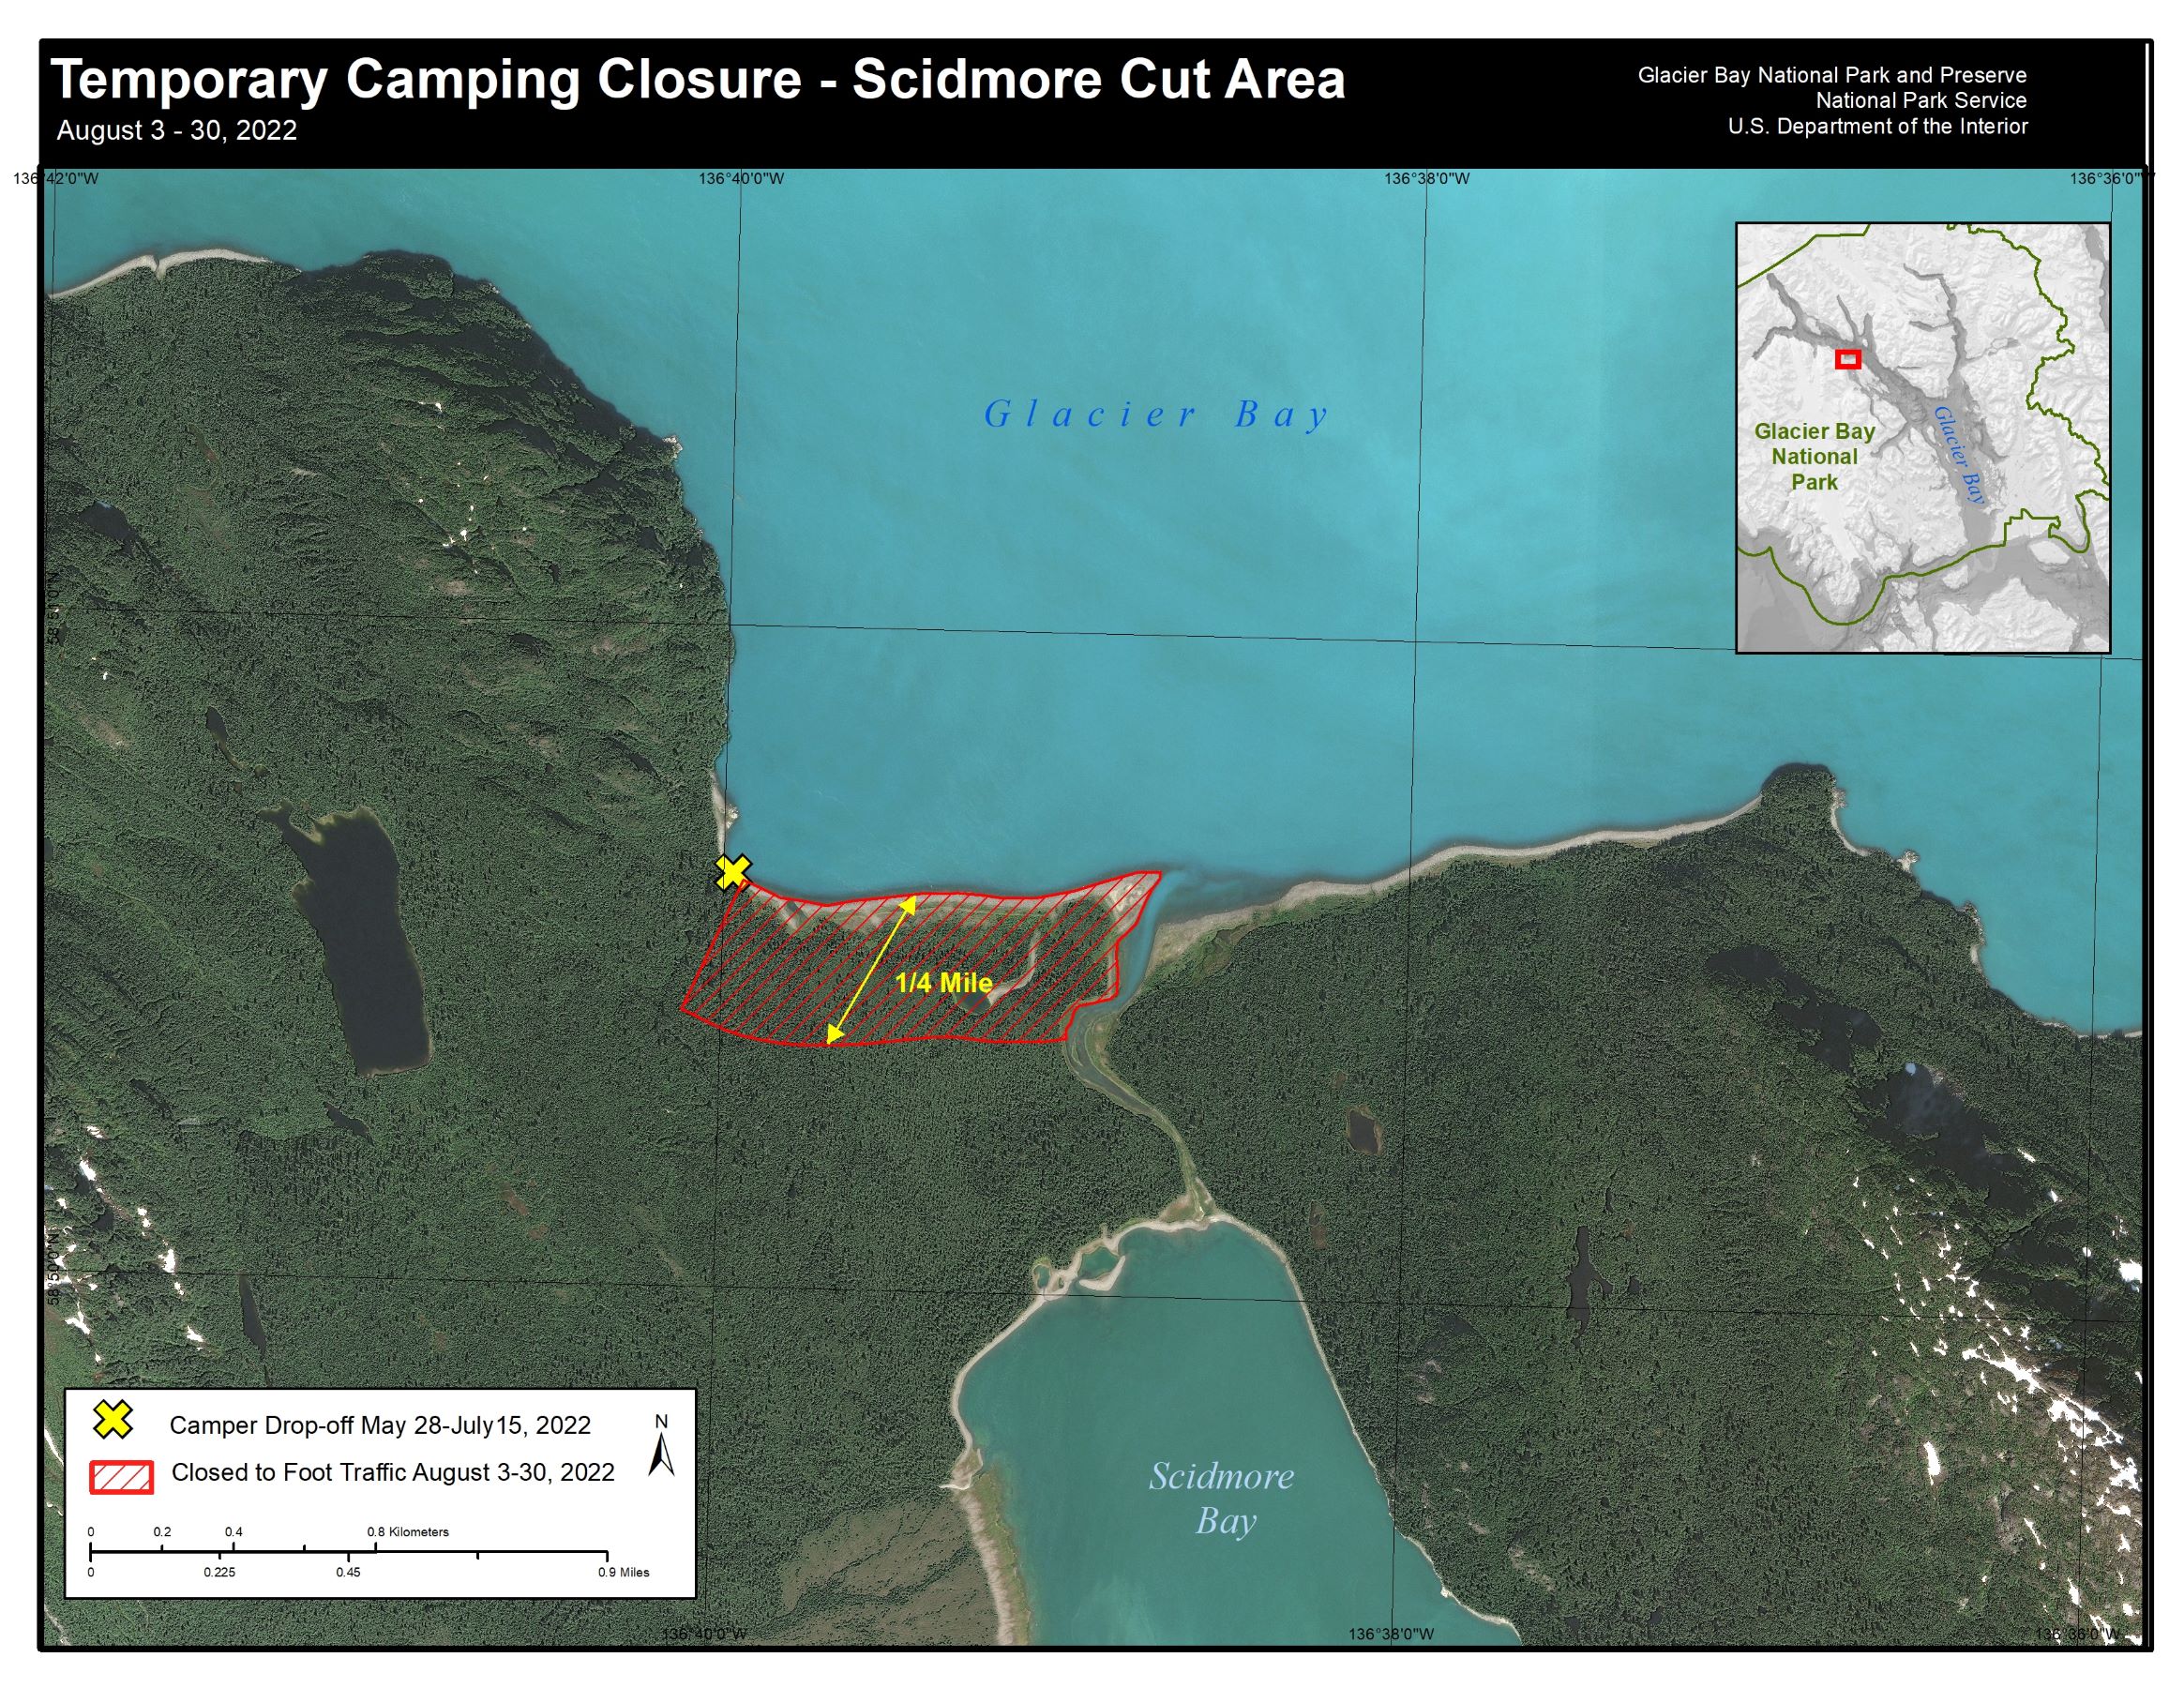 Map of the Scidmore cut area showing a bear closure. Contact the park for details 907-697-2230.